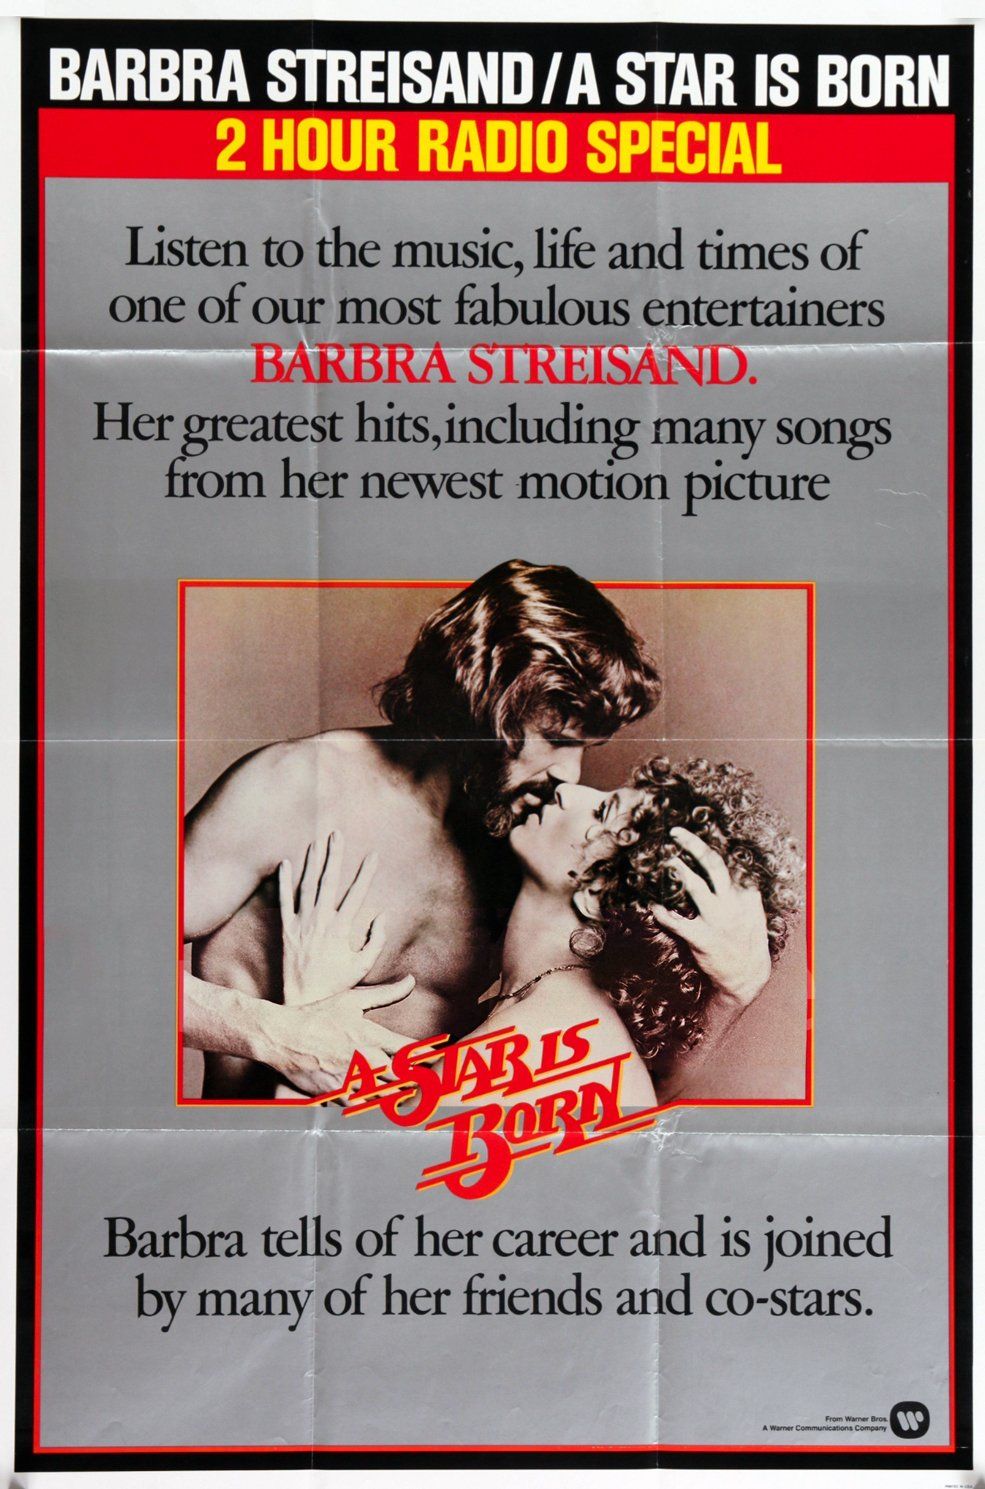 Poster for the 1976 Streisand radio show